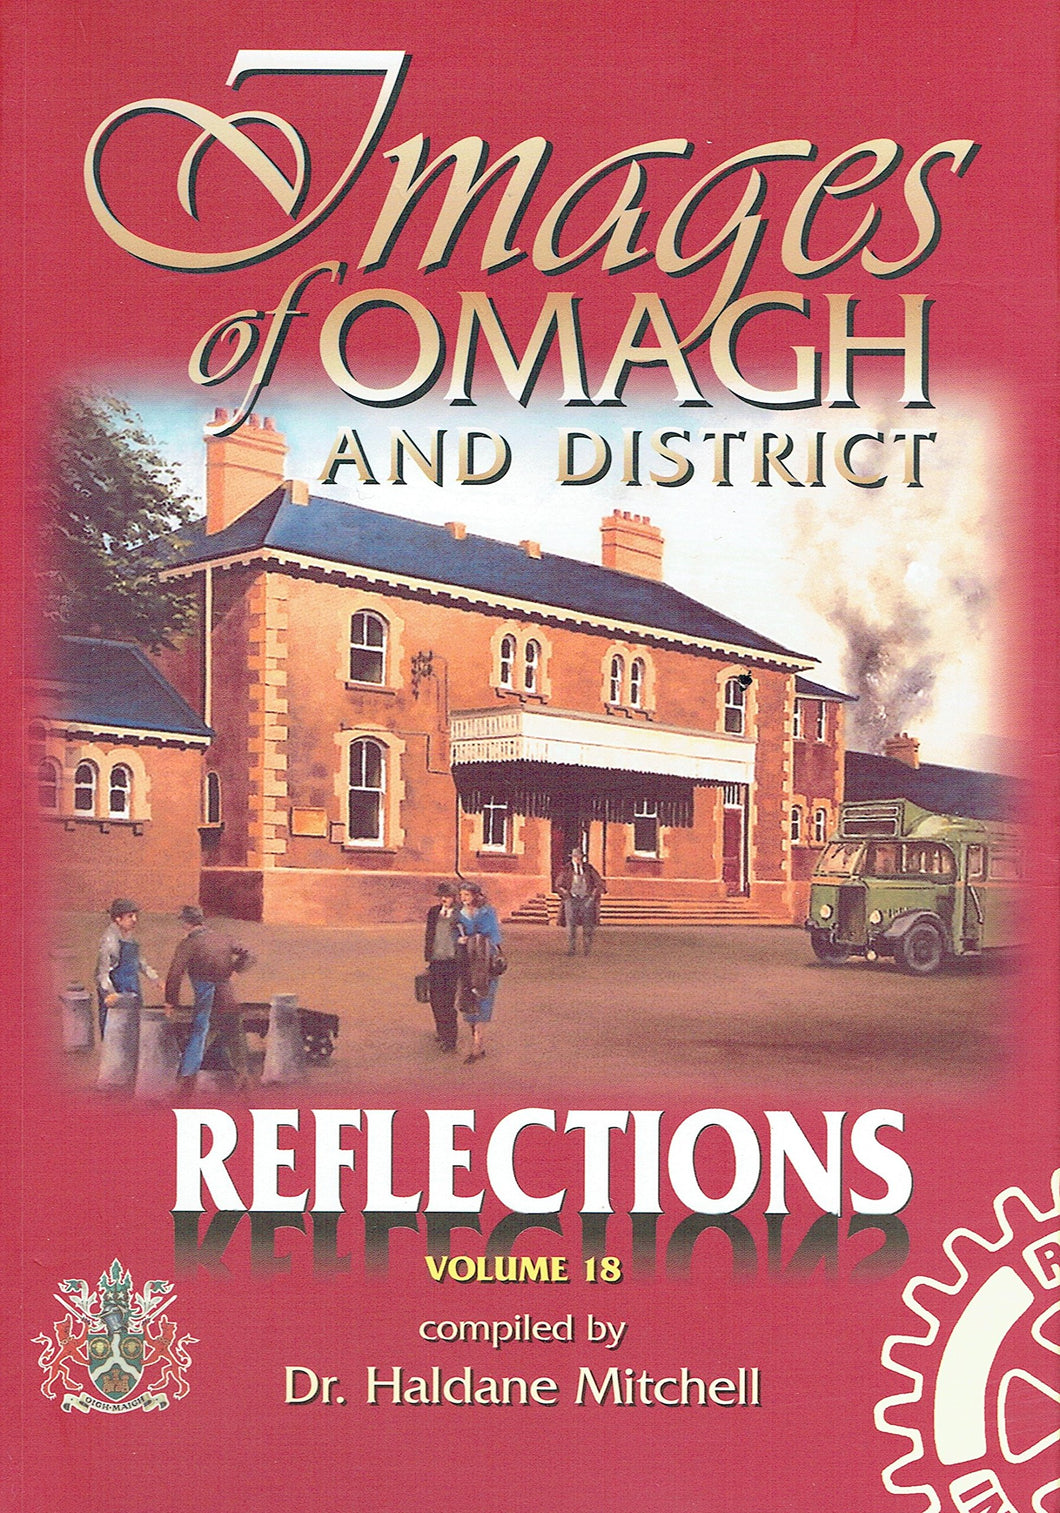 Images of Omagh and District: v. 18: Reflections (Images of Omagh & District S.)